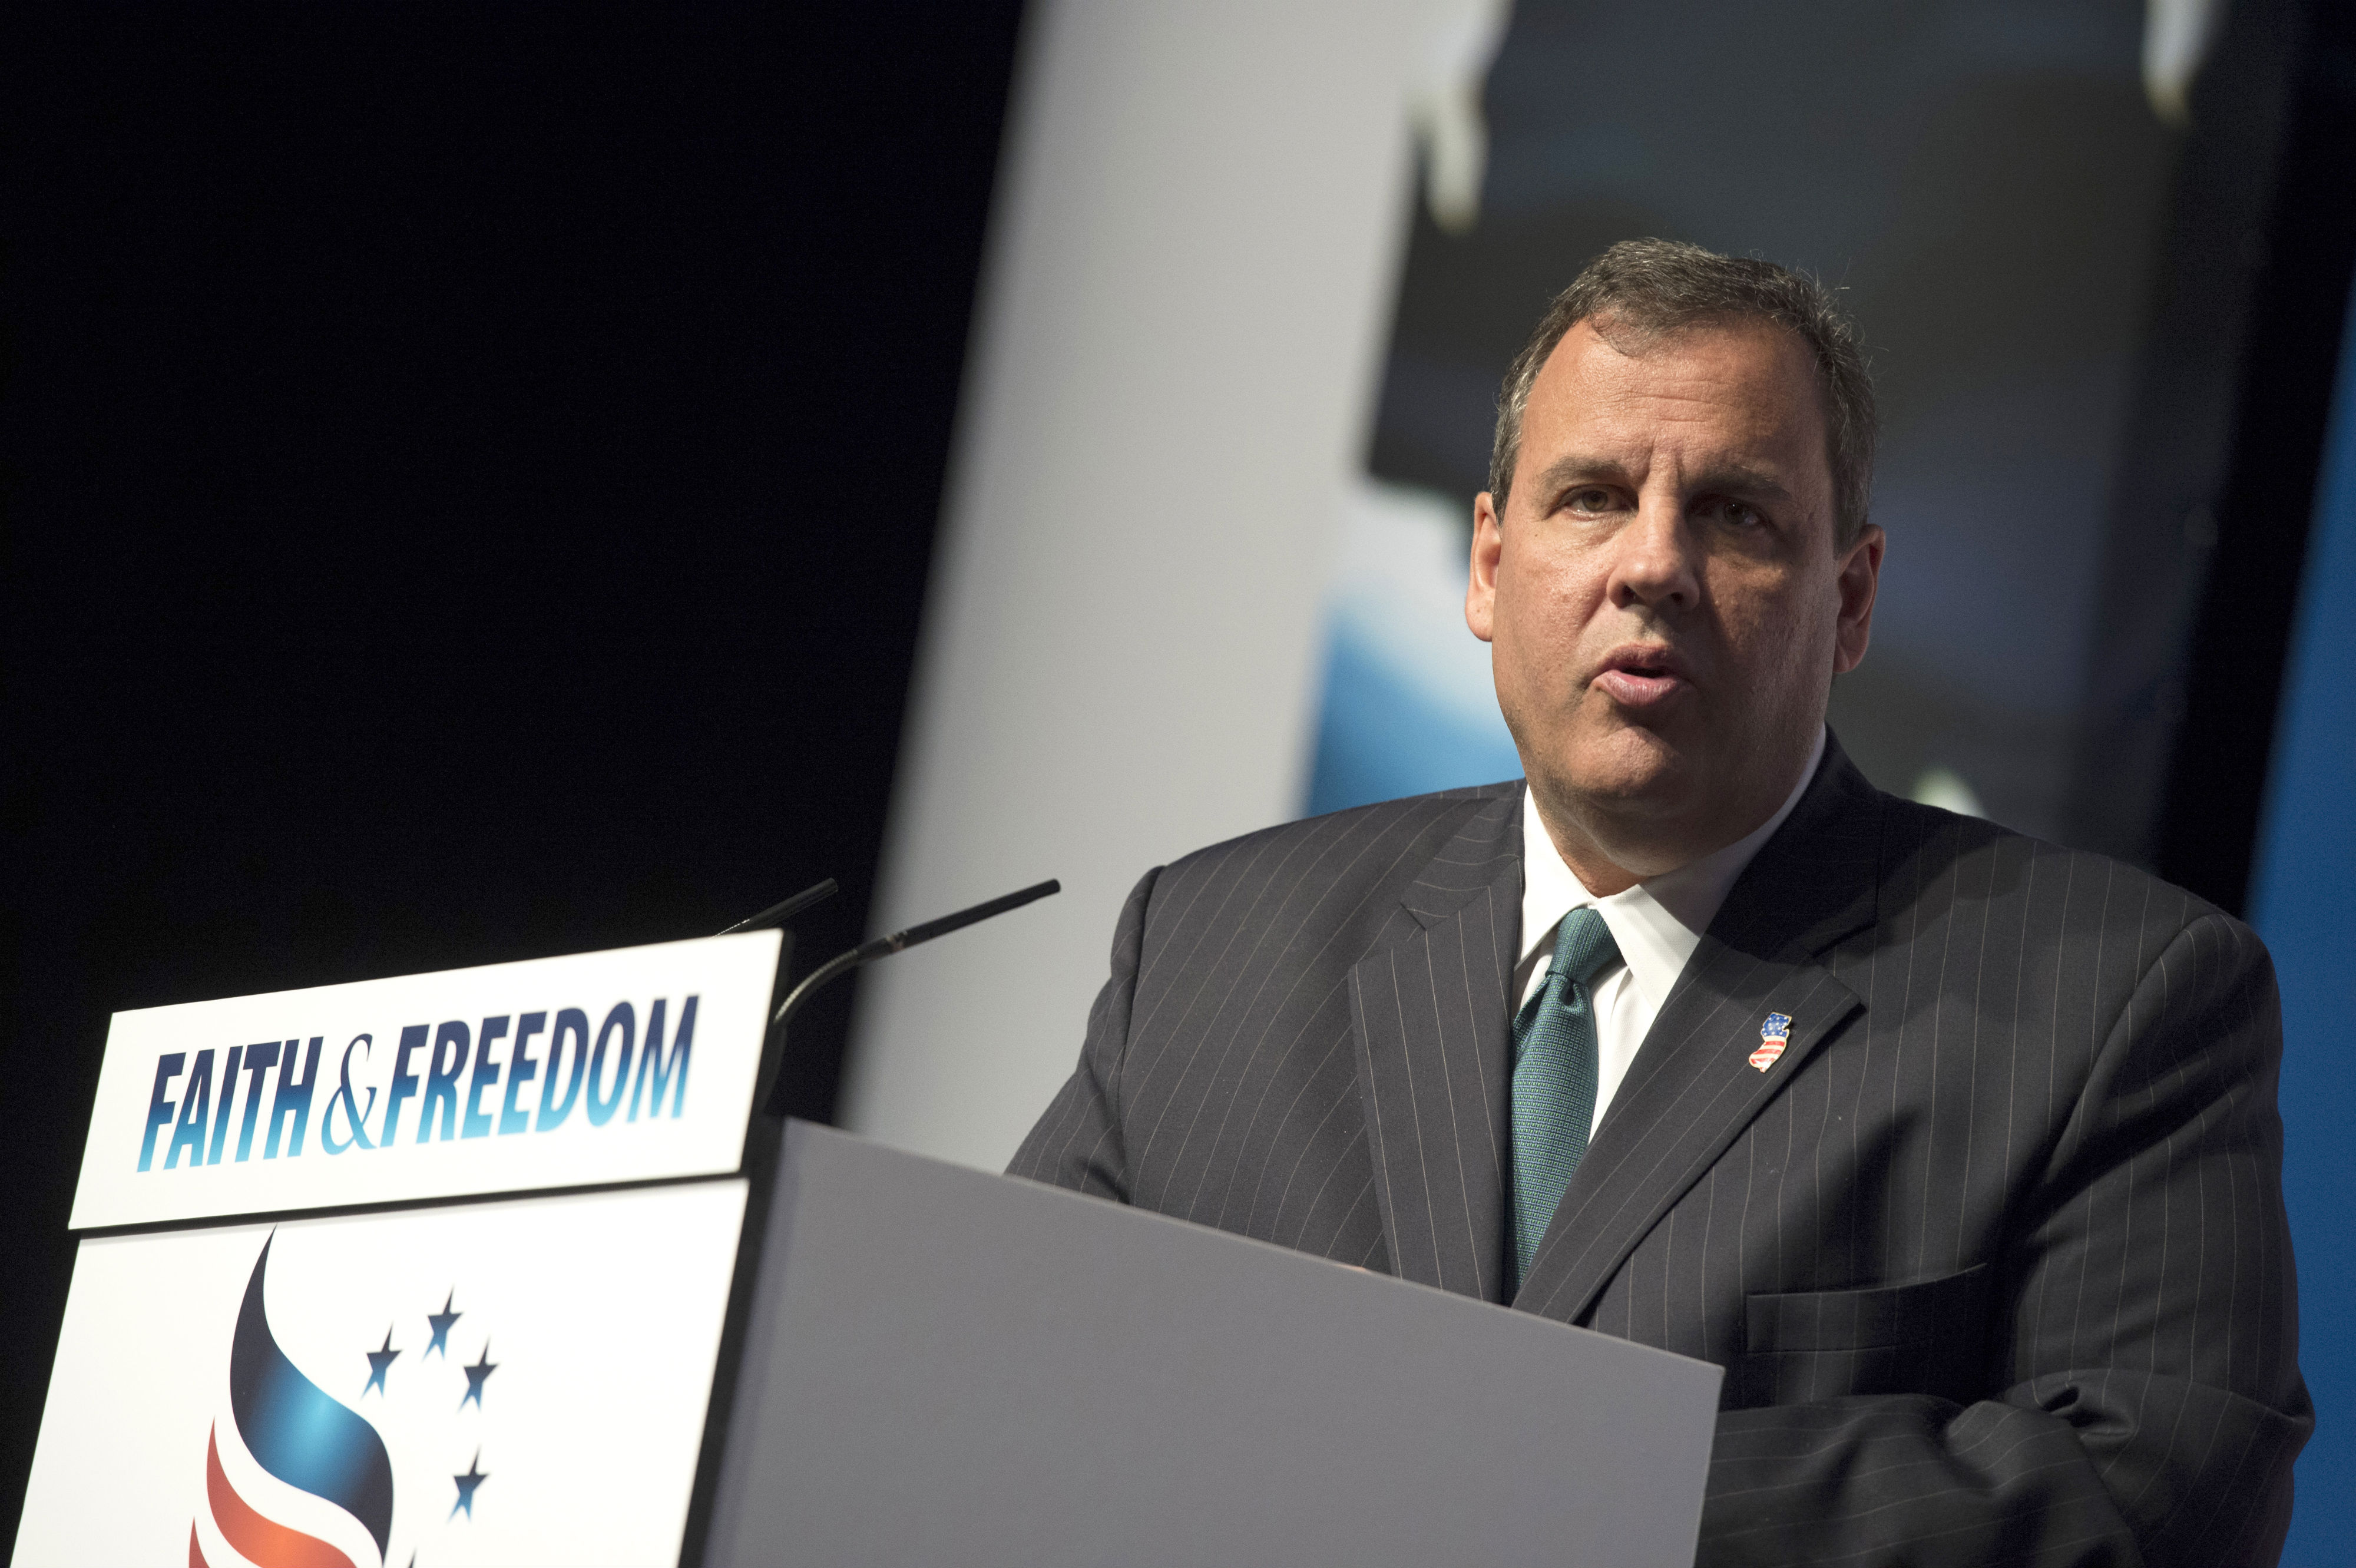 Christie Panders to Christian Right at ‘Faith and Freedom’ Event